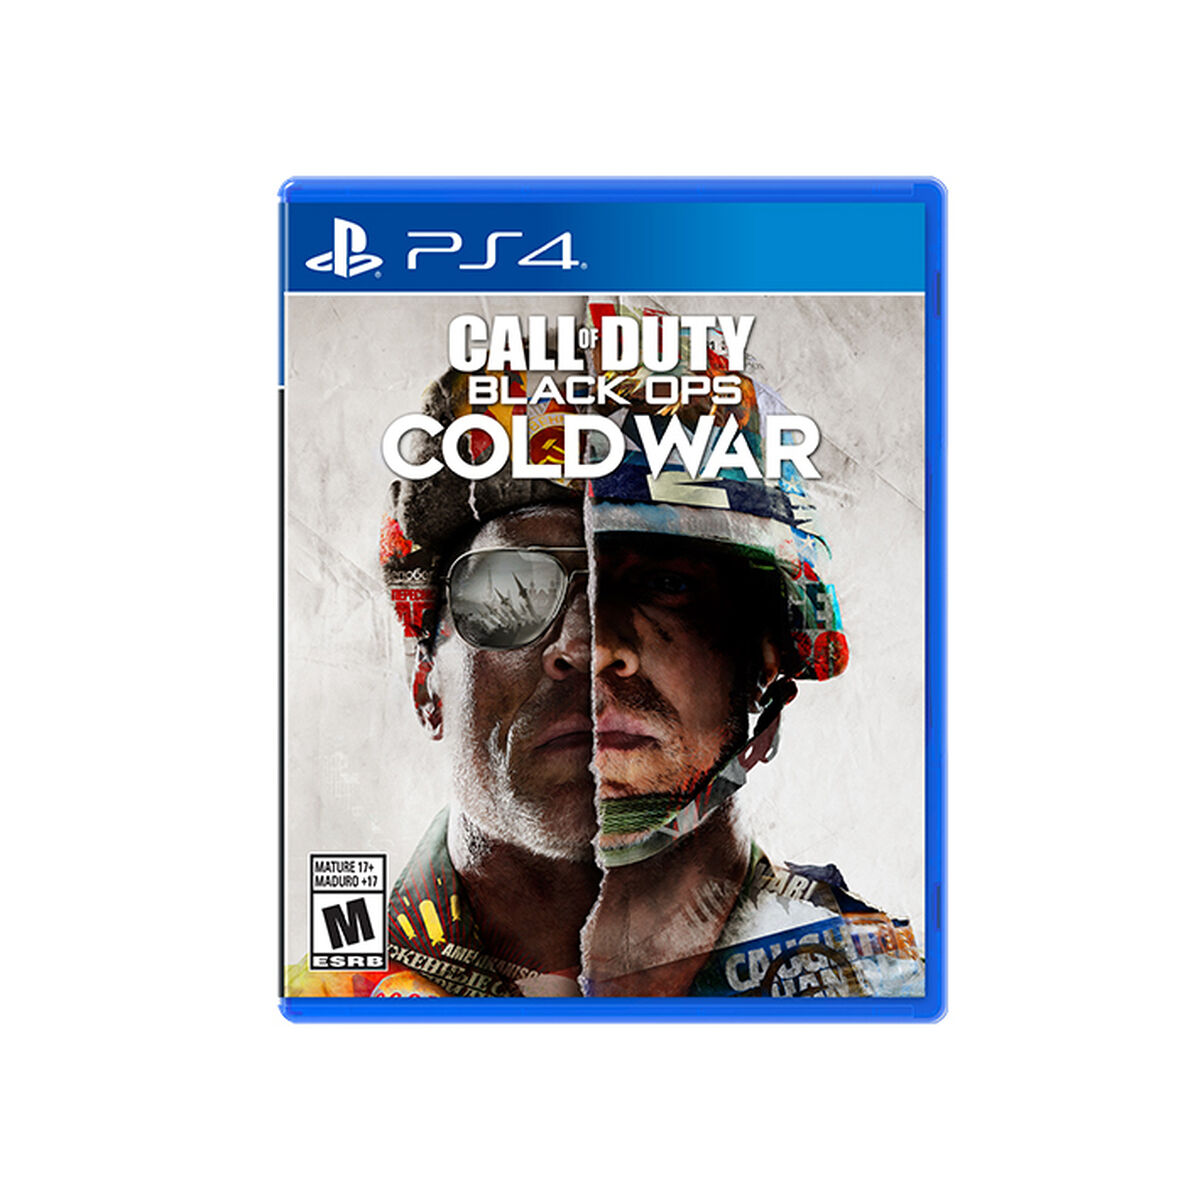 Juego Activision PS4 Call Of Duty Black Ops Cold War